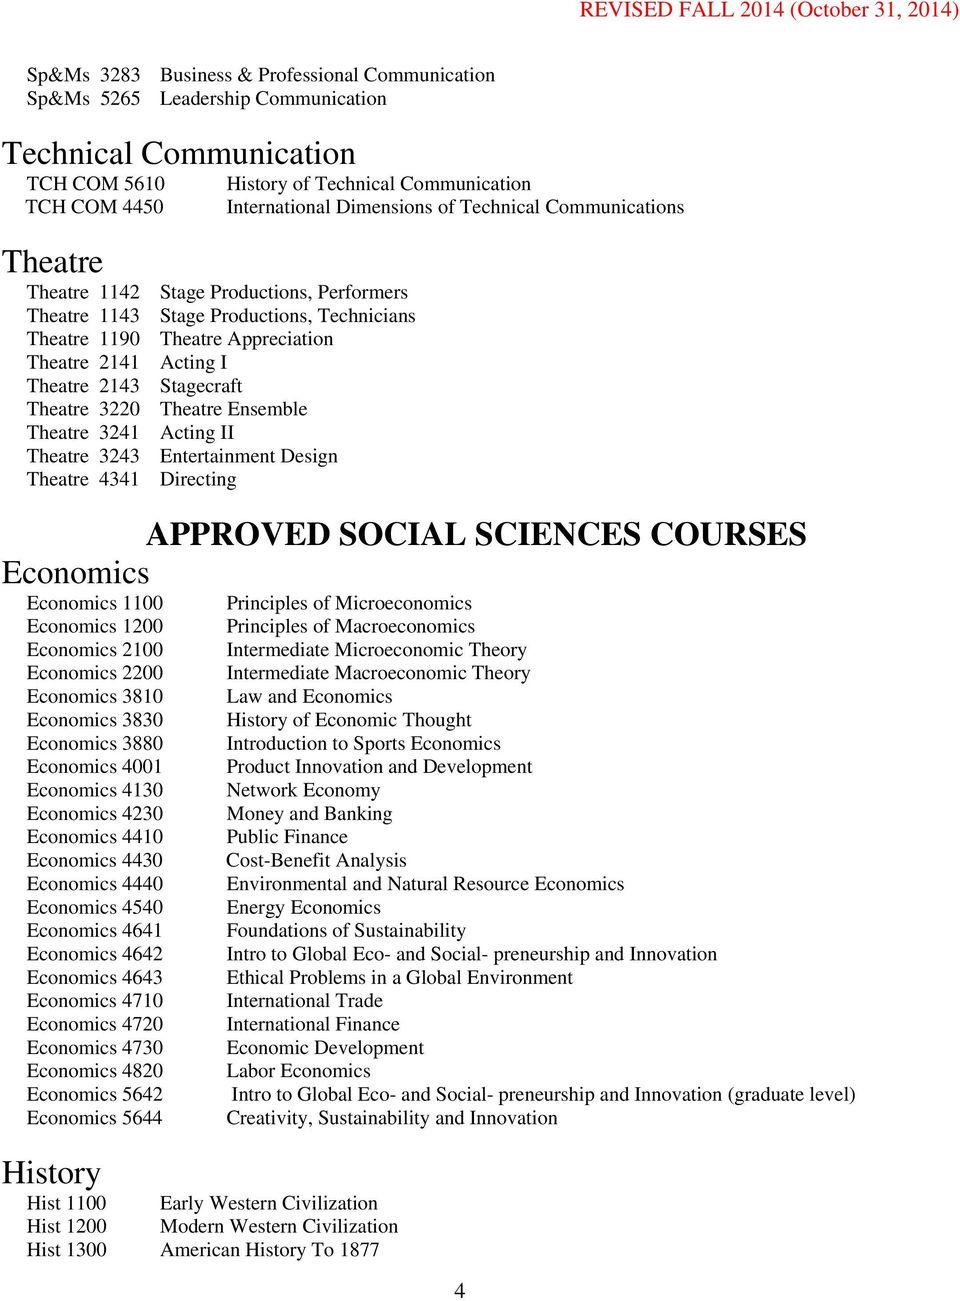 Theatre 4341 Directing History of Technical Communication International Dimensions of Technical Communications APPROVED SOCIAL SCIENCES COURSES Economics Economics 1100 Economics 1200 Economics 2100